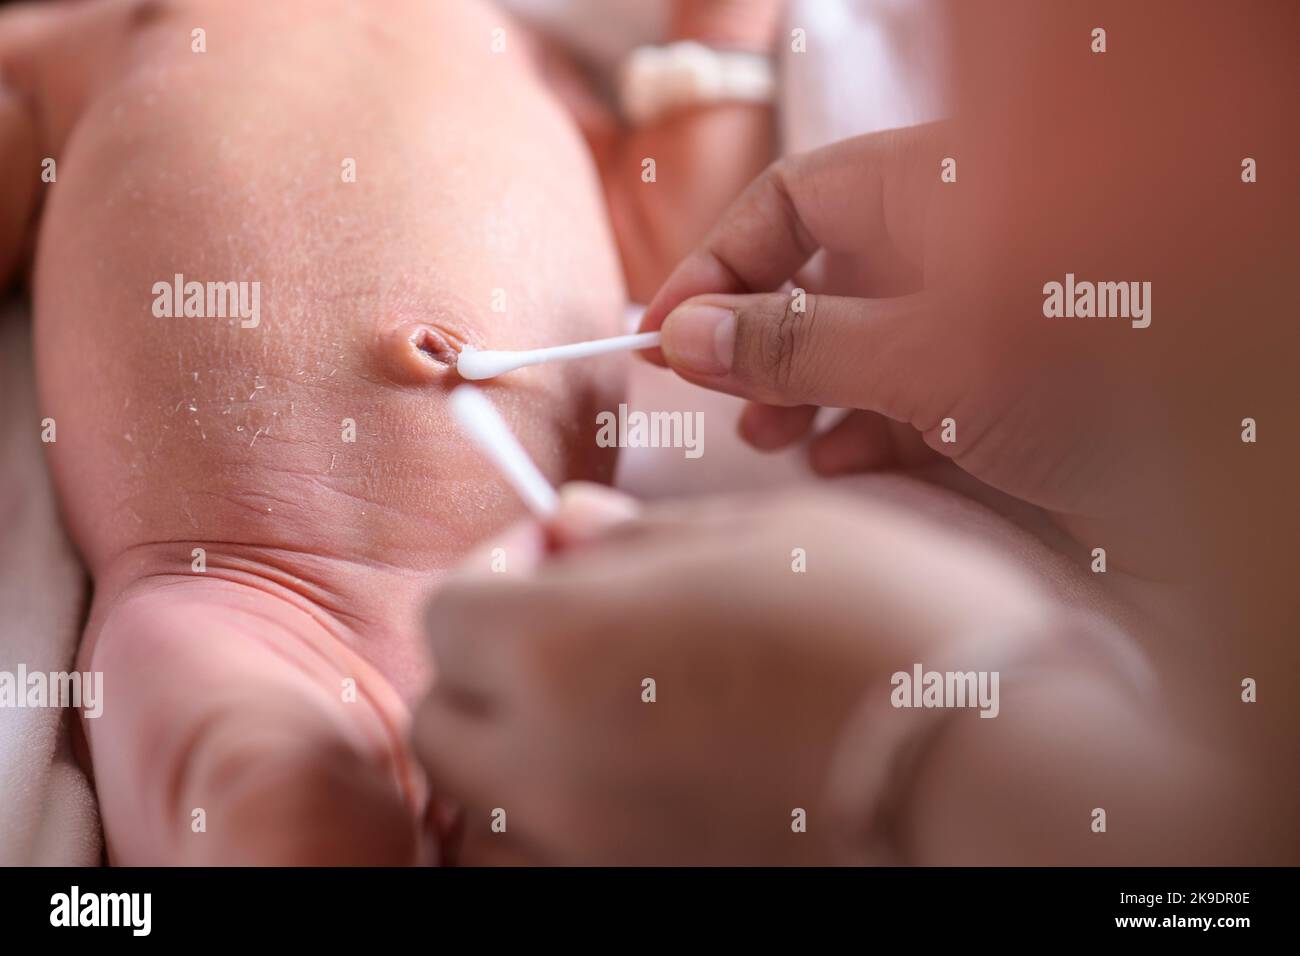 Mother cleaning the navel of newborn baby closeup Stock Photo